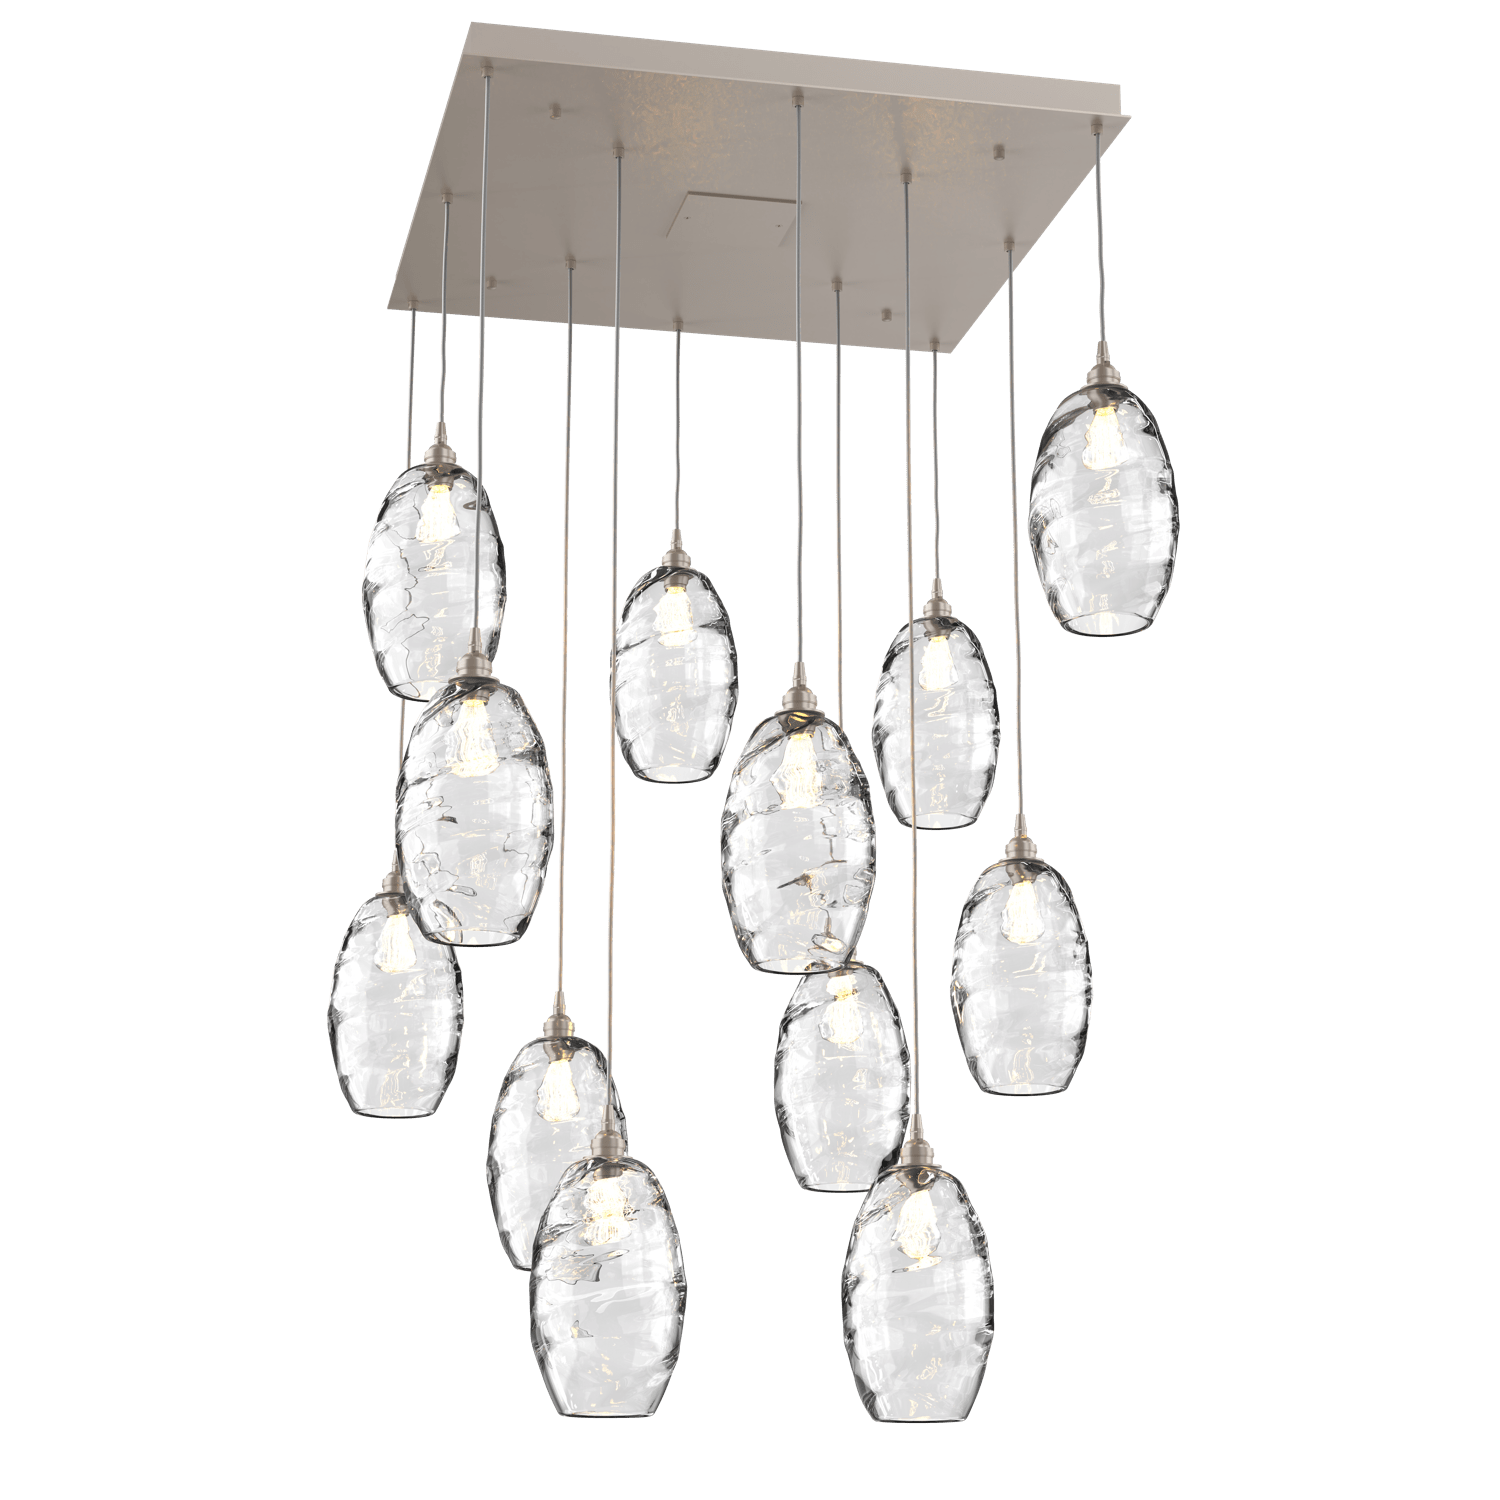 CHB0035-12-BS-OC-Hammerton-Studio-Optic-Blown-Glass-Elisse-12-light-square-pendant-chandelier-with-metallic-beige-silver-finish-and-optic-clear-blown-glass-shades-and-incandescent-lamping